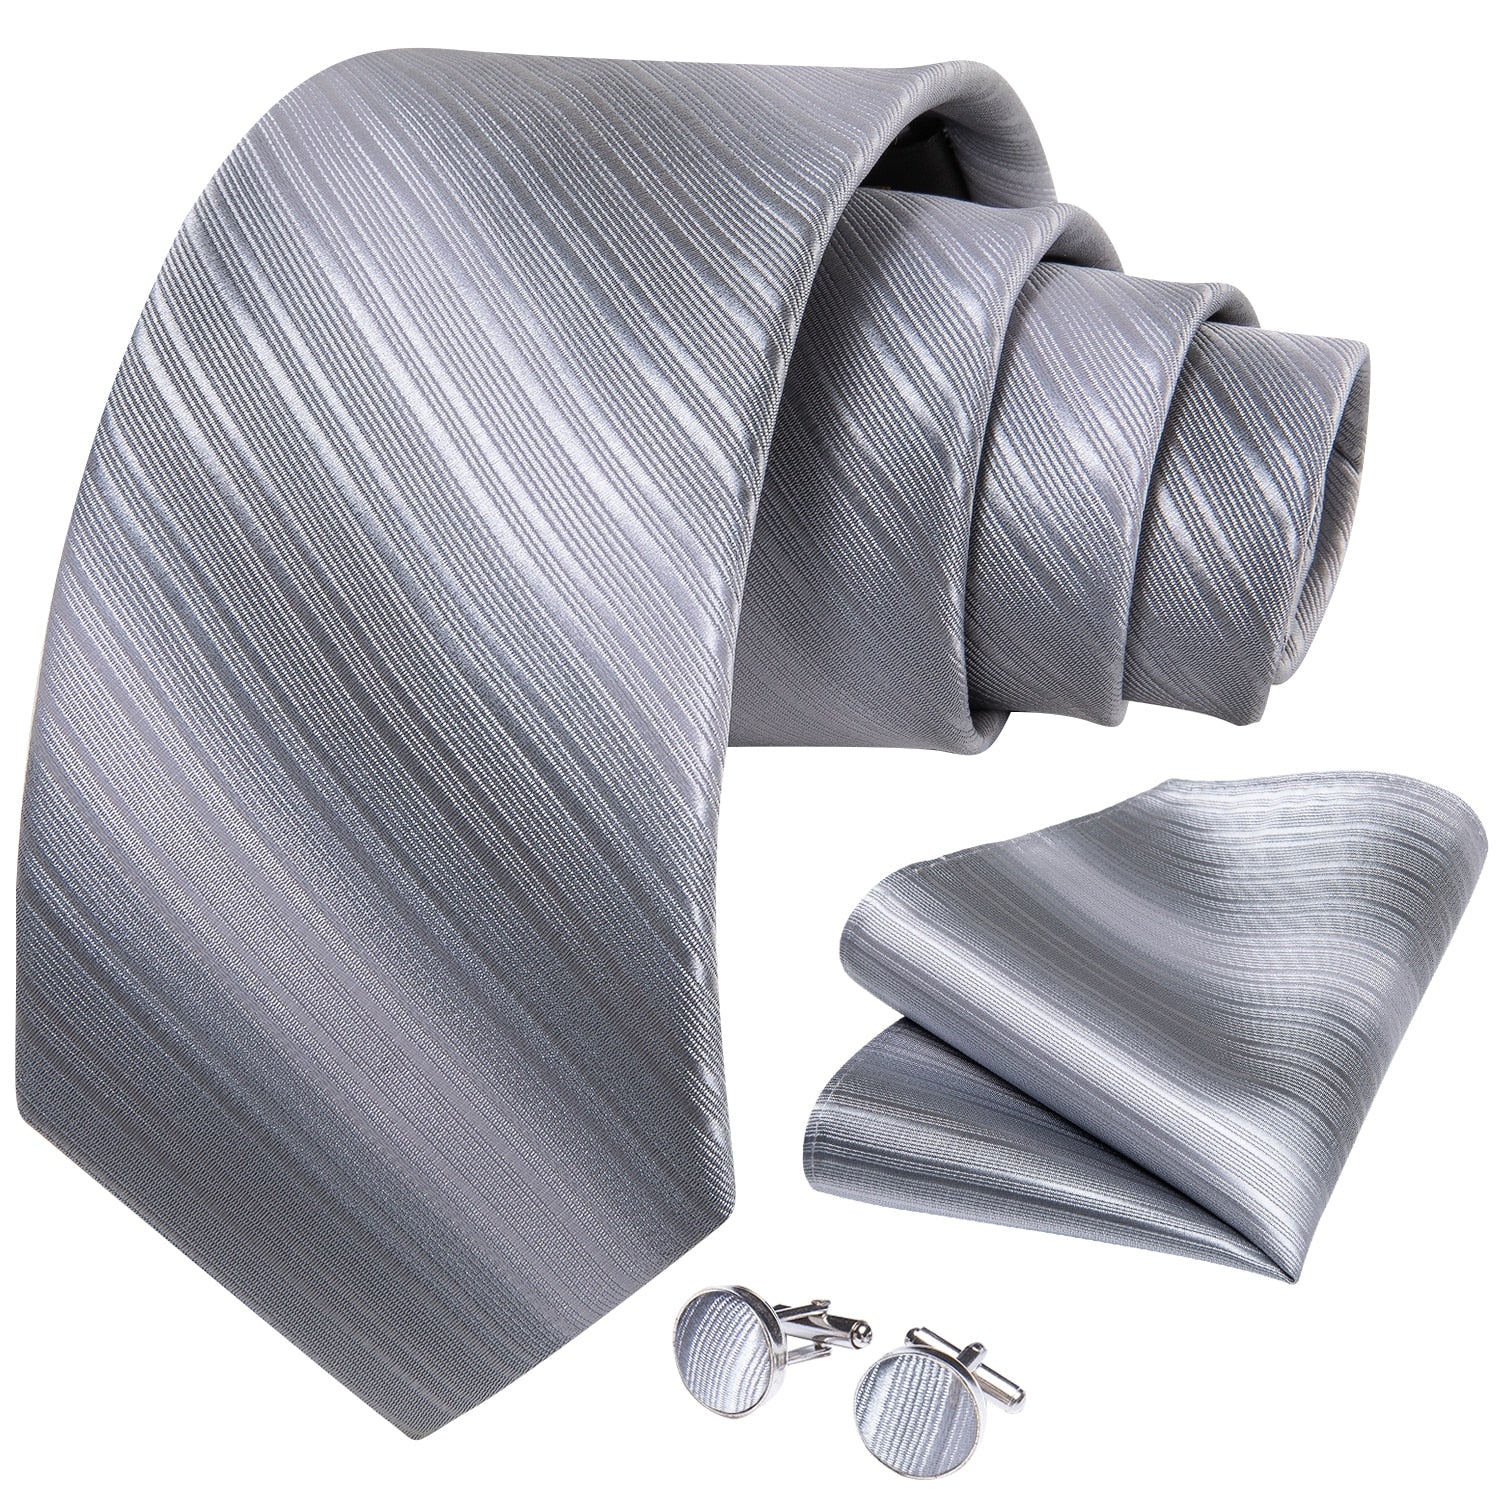 Luxury Tie with Brooch Chain